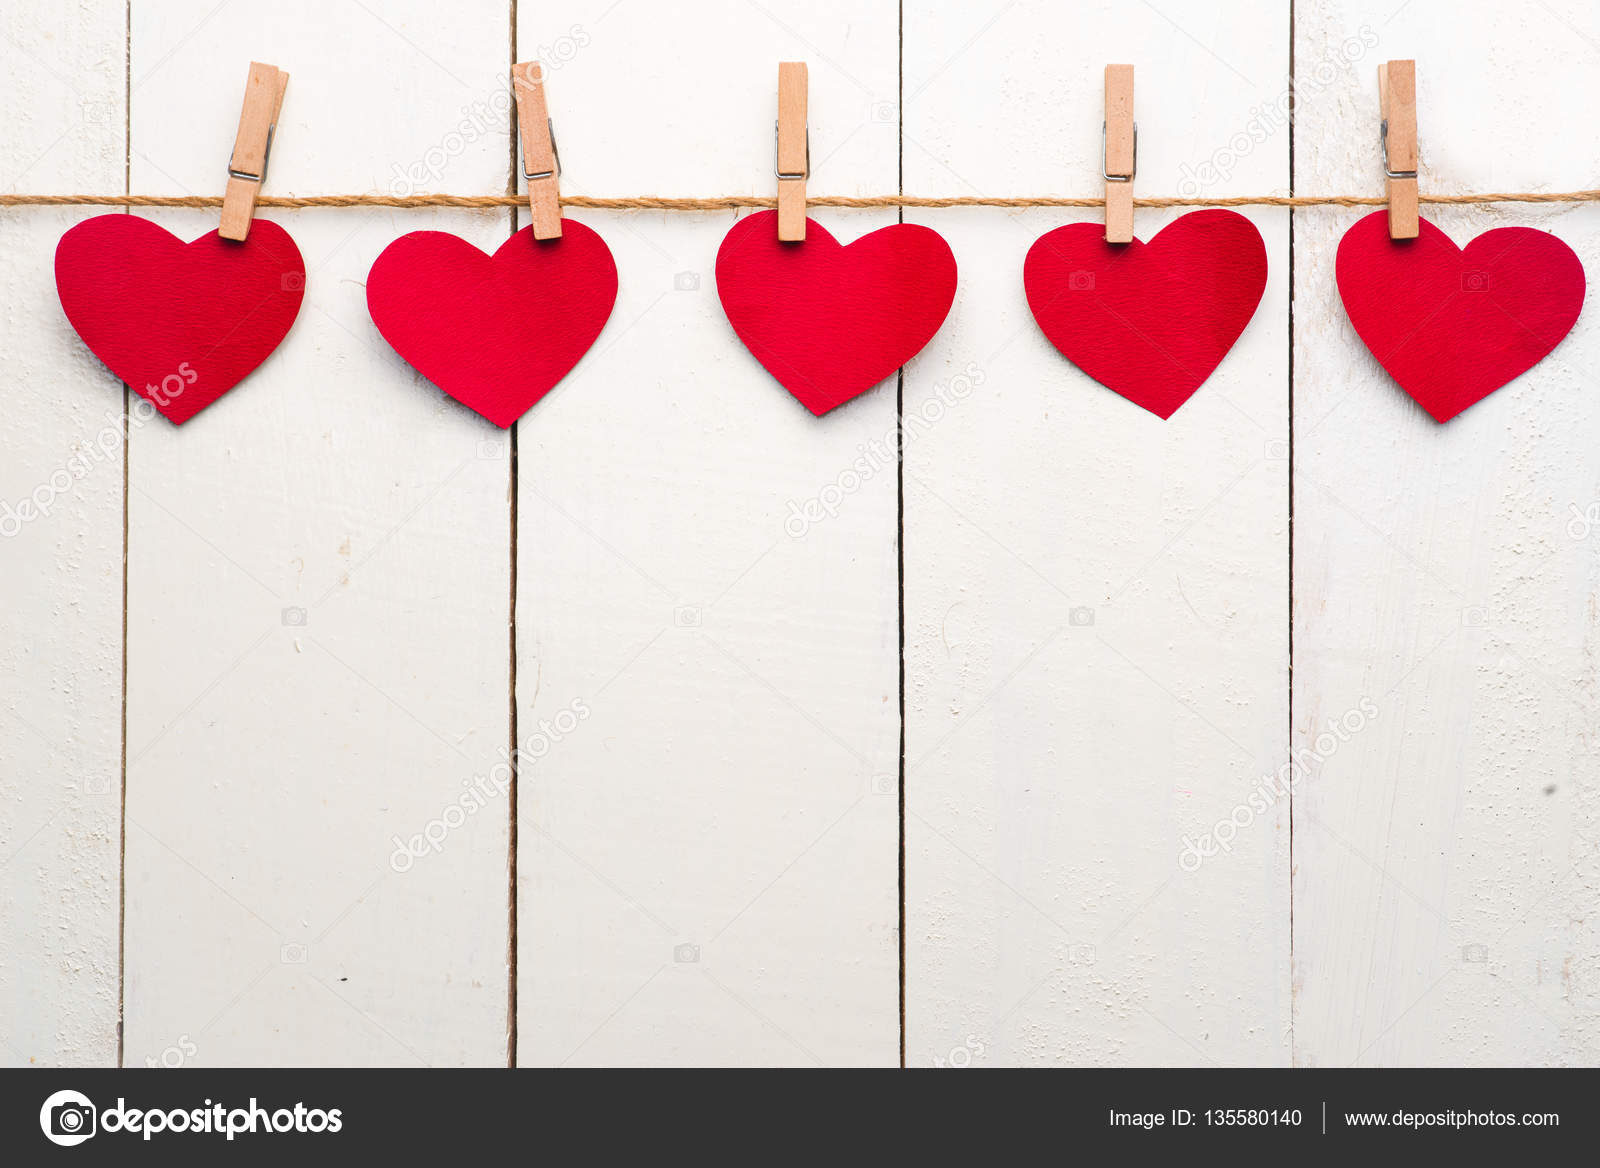 Red hearts hanging on clothesline — Stock Photo © makidotvn #135580140